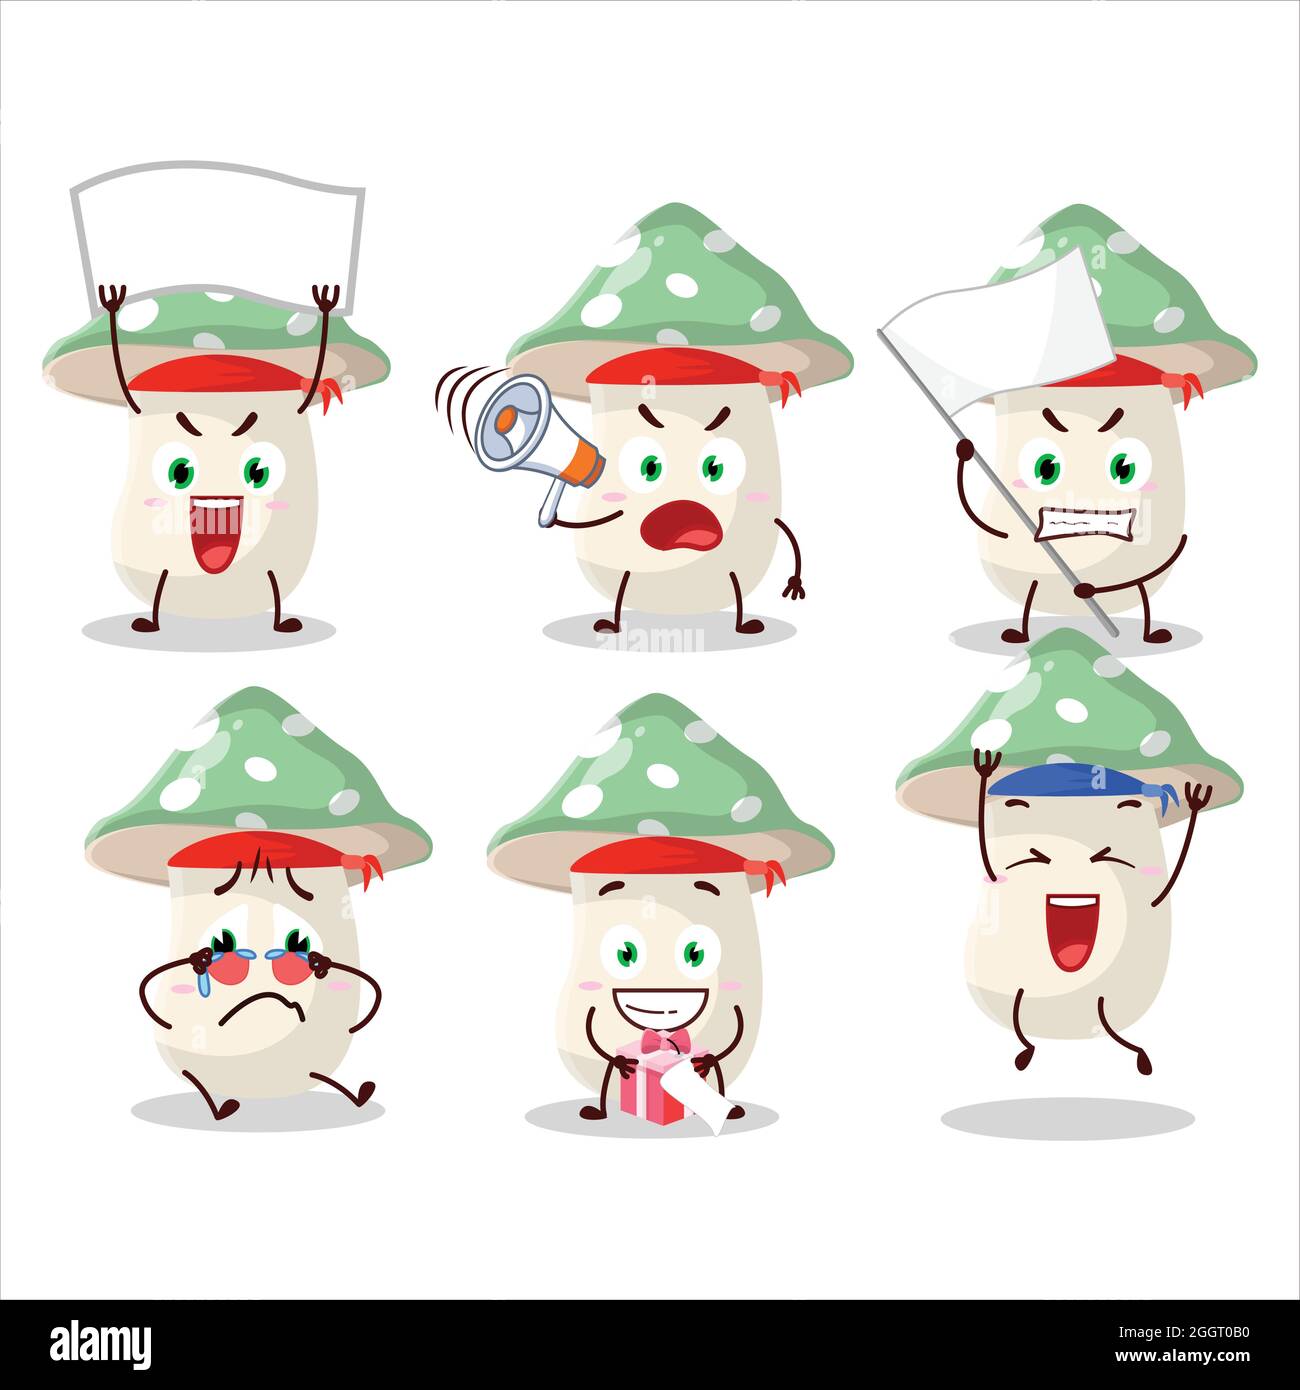 Mascot design style of green amanita character as an attractive supporter. Vector illustration Stock Vector